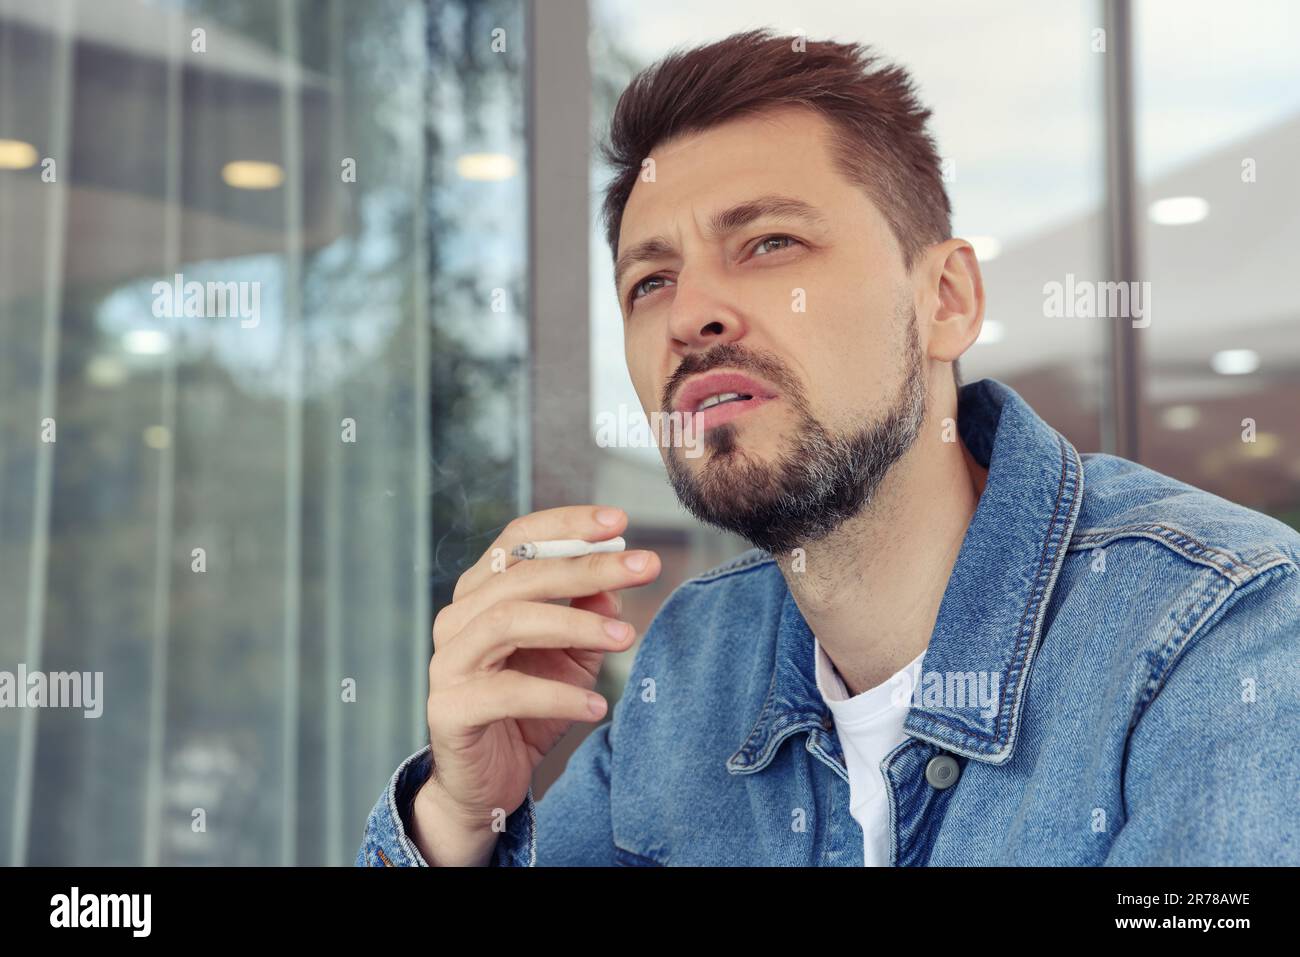 Handsome man smoking cigarette outdoors. Space for text Stock Photo